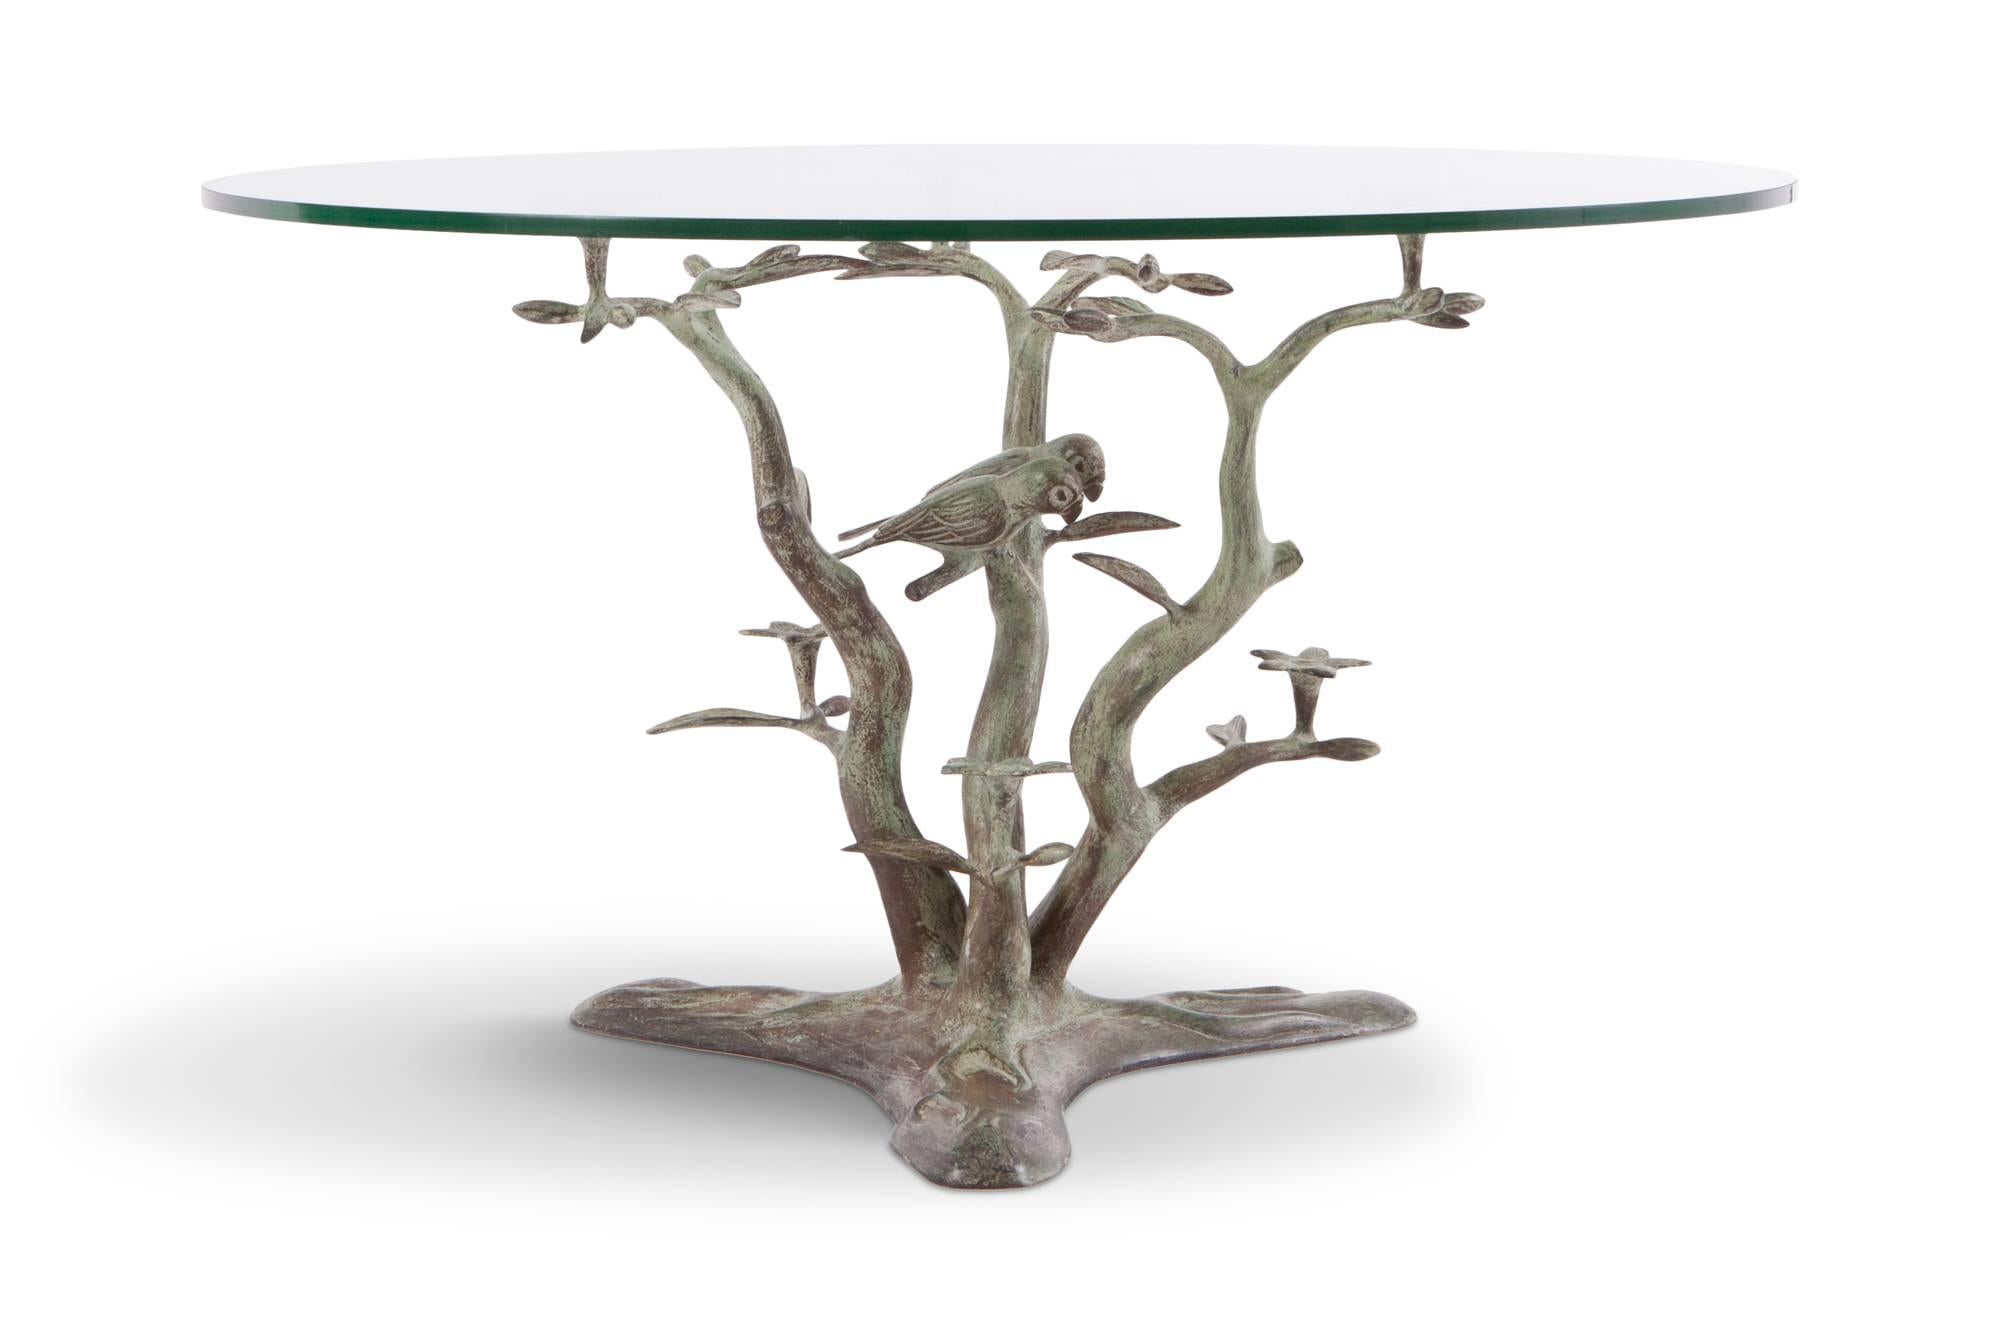 Regency Bronze Coffee Table with Glass Top, 1960s by Willy Daro